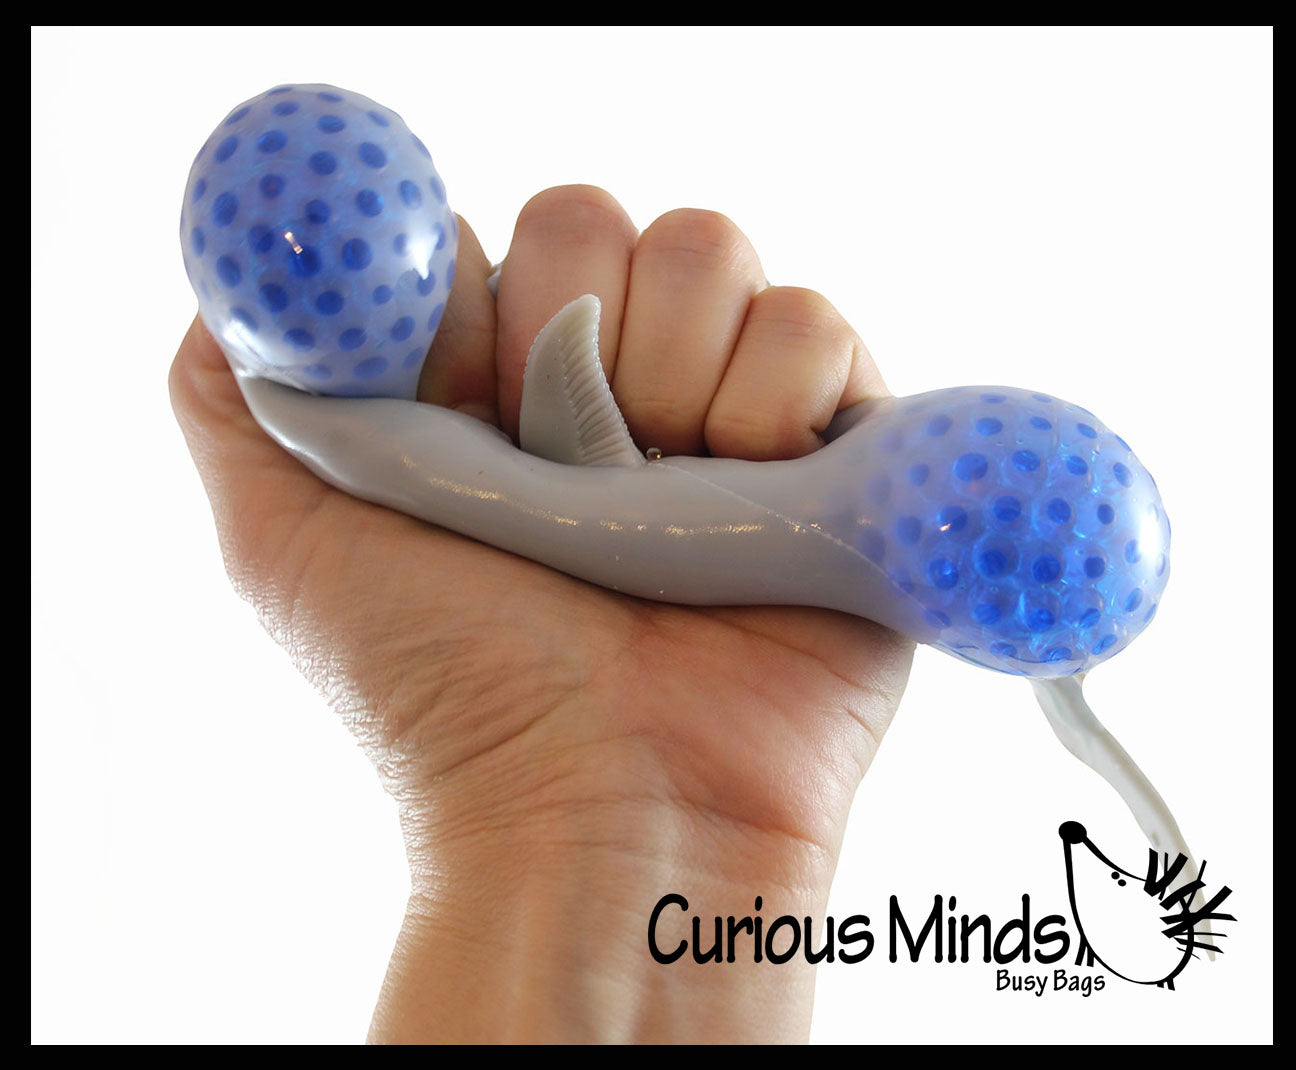 andre mendonca recommends water filled sex toy pic